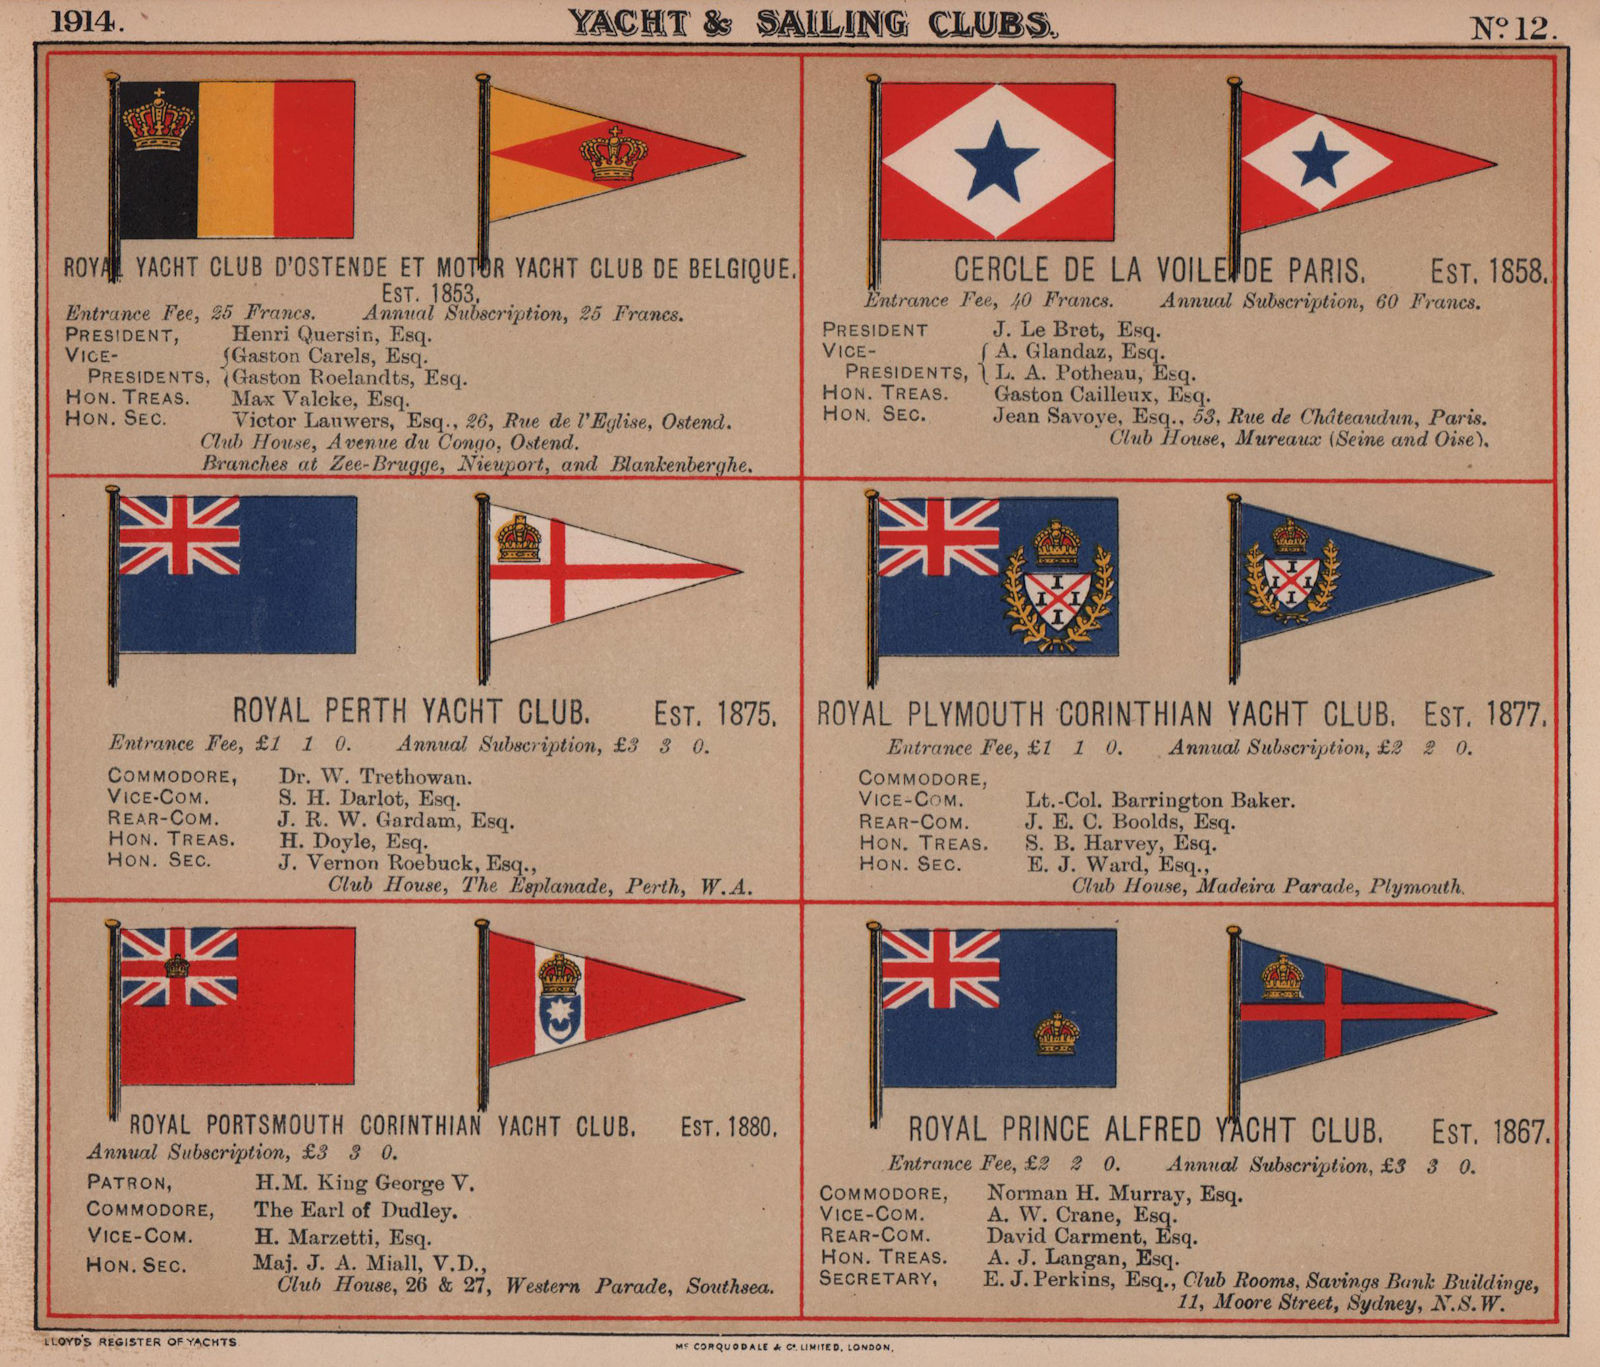 Associate Product ROYAL YACHT & SAILING CLUB FLAGS N-P D Ostende Perth Plymouth Portsmouth 1914